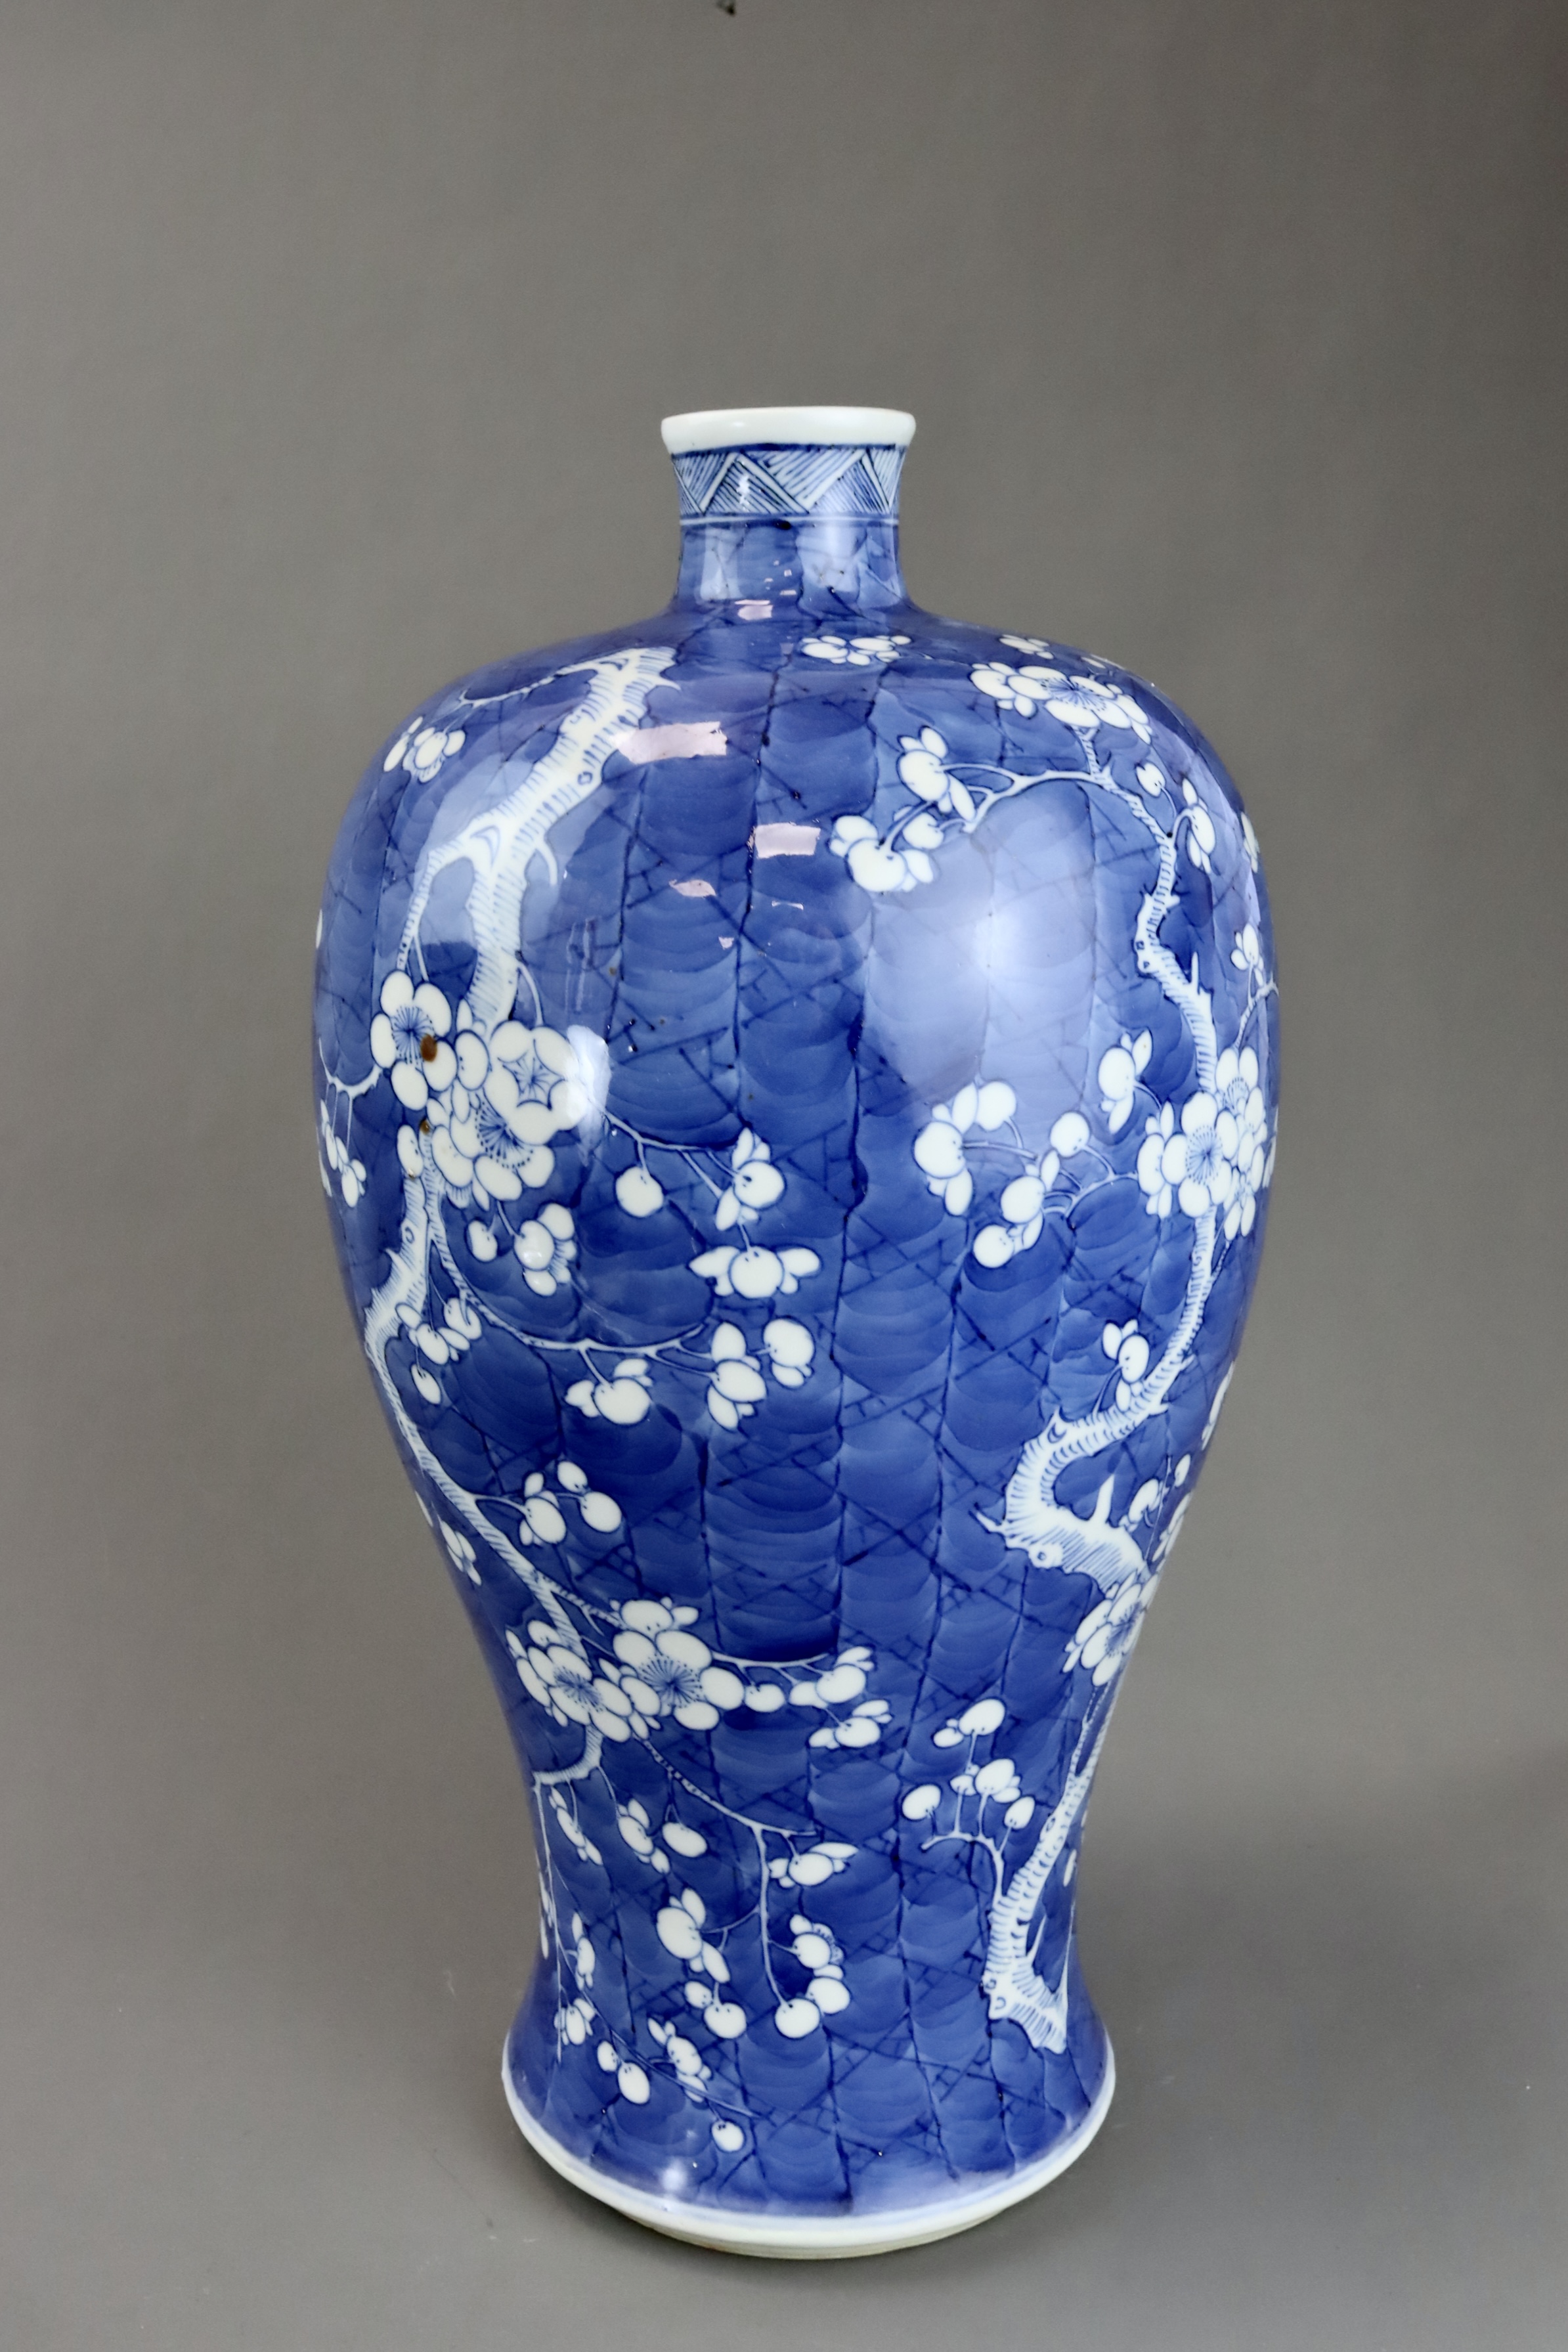 A Blue and White Vase with Prunus, 19th century - Image 5 of 7